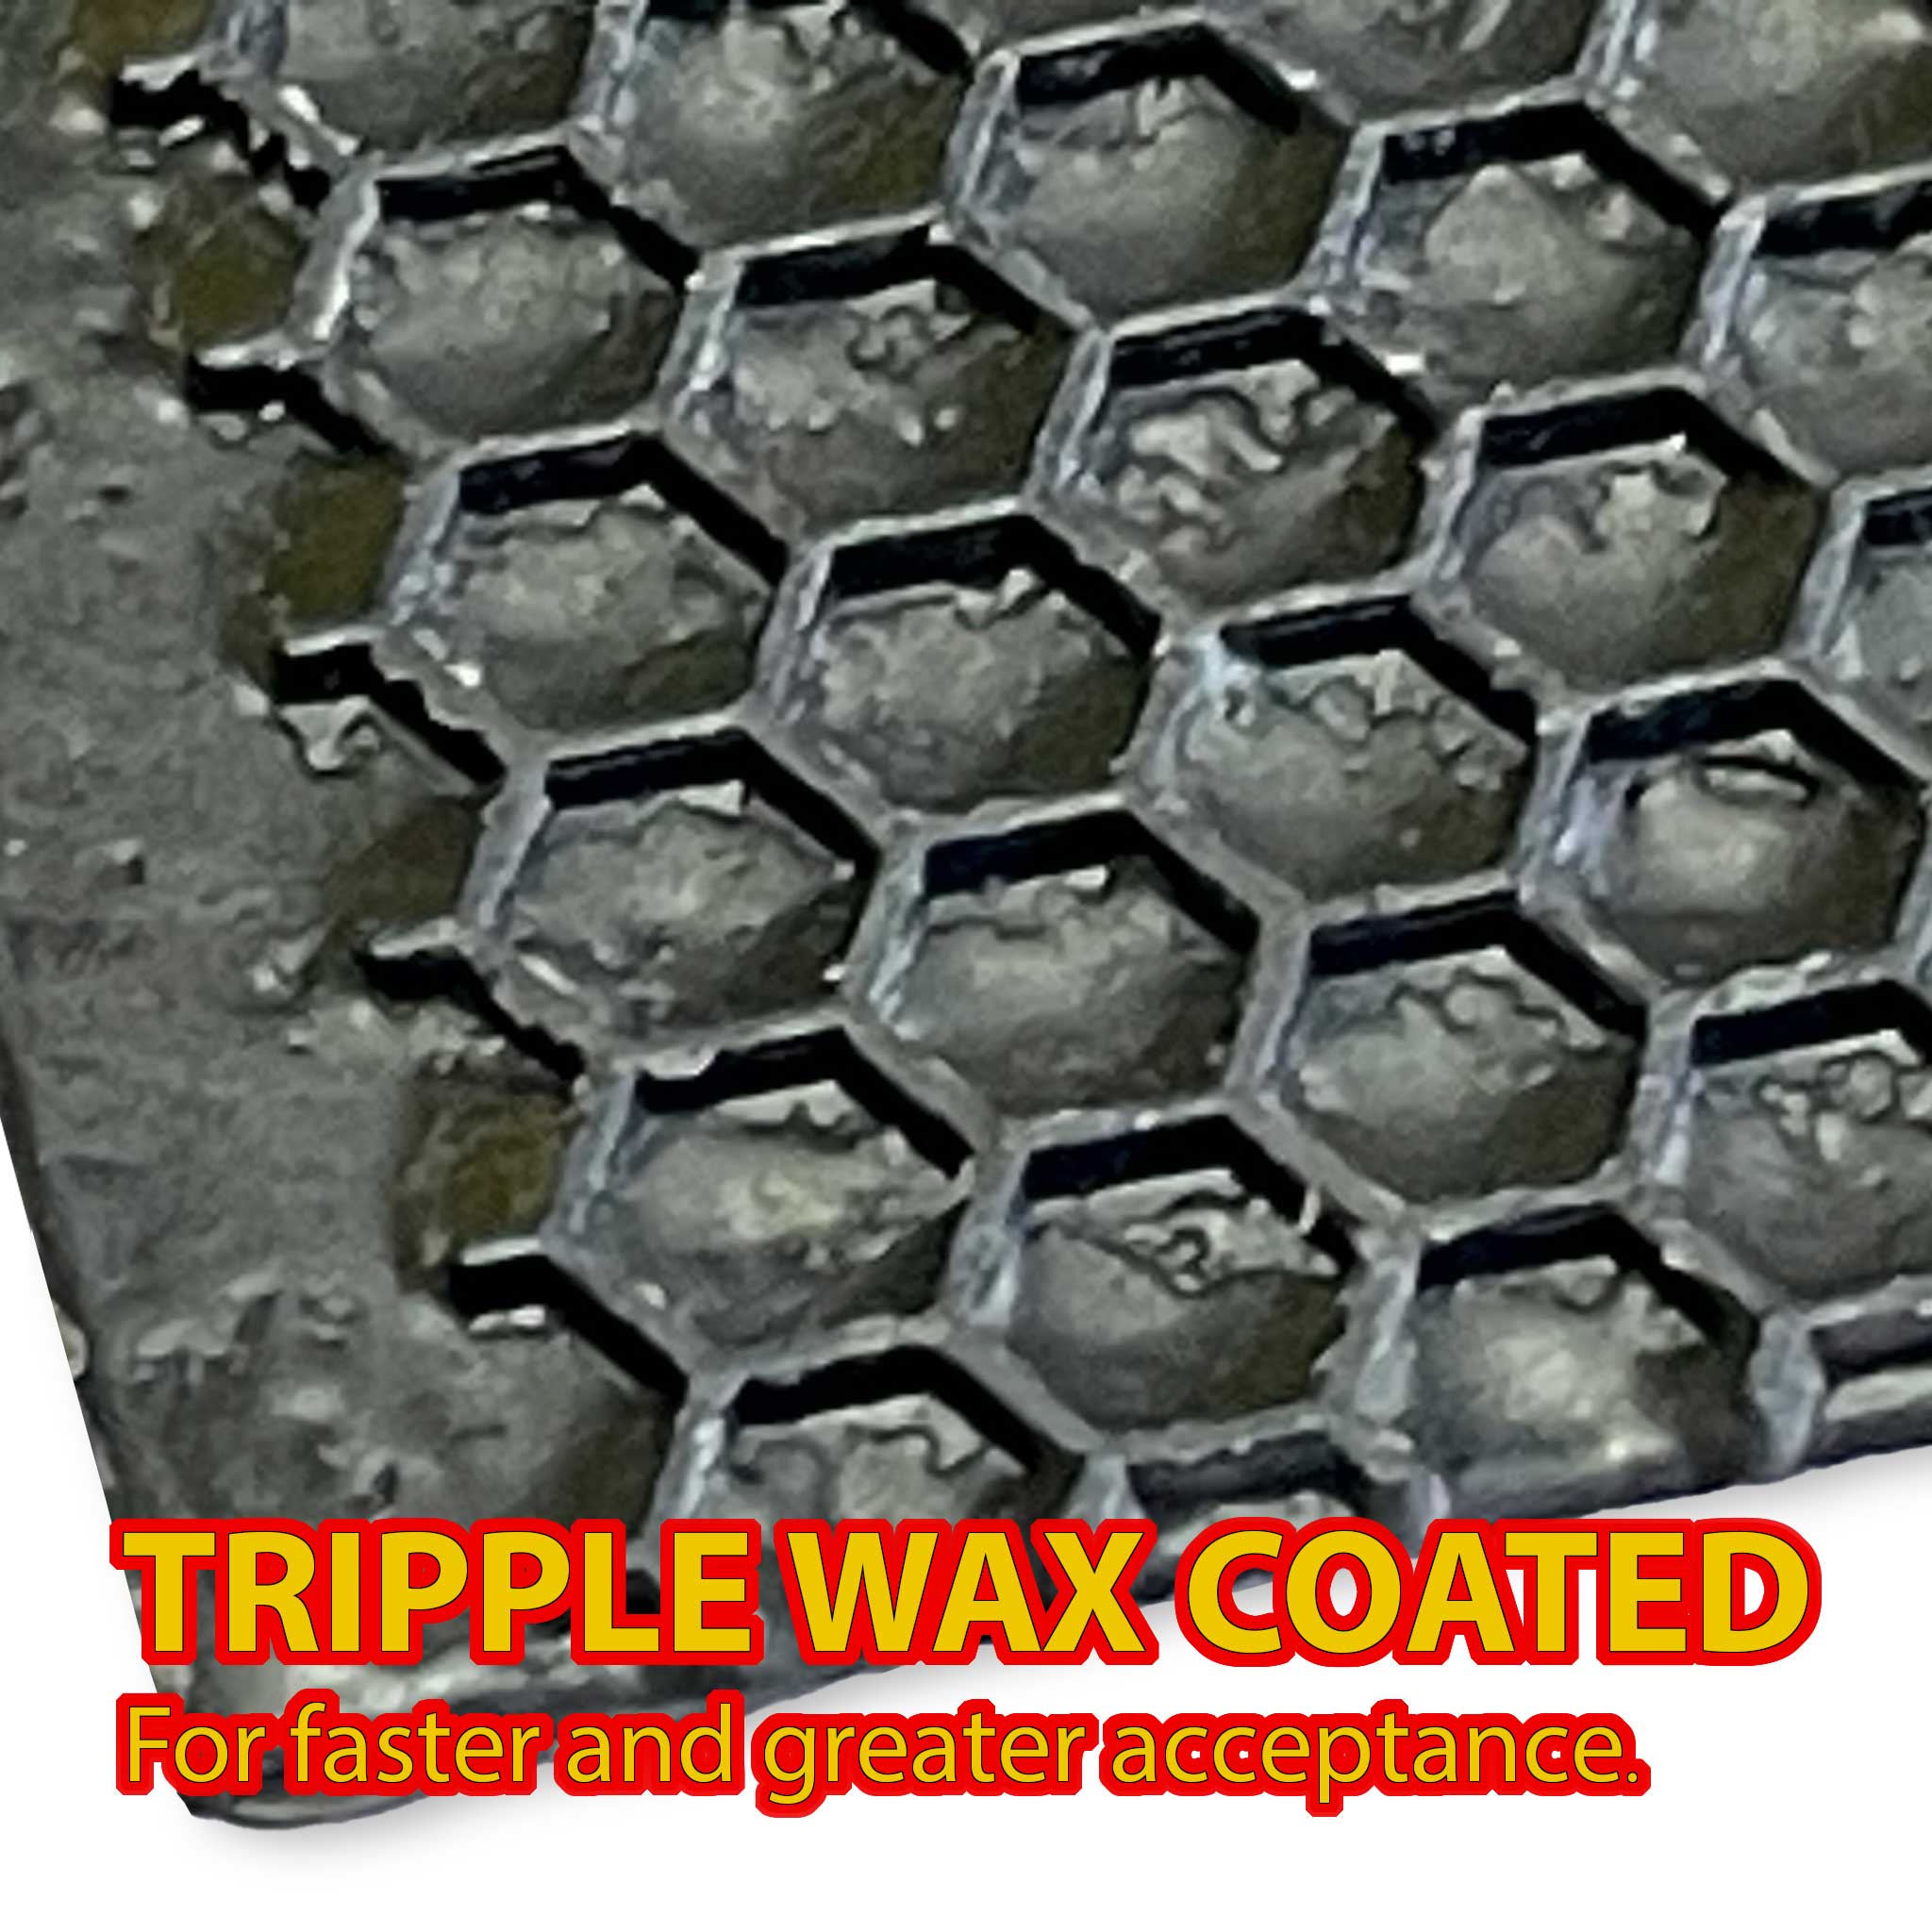 Triple Wax Coated Black Full Depth Plastic Foundation - Hive Parts collection by Buzzbee Beekeeping Supplies